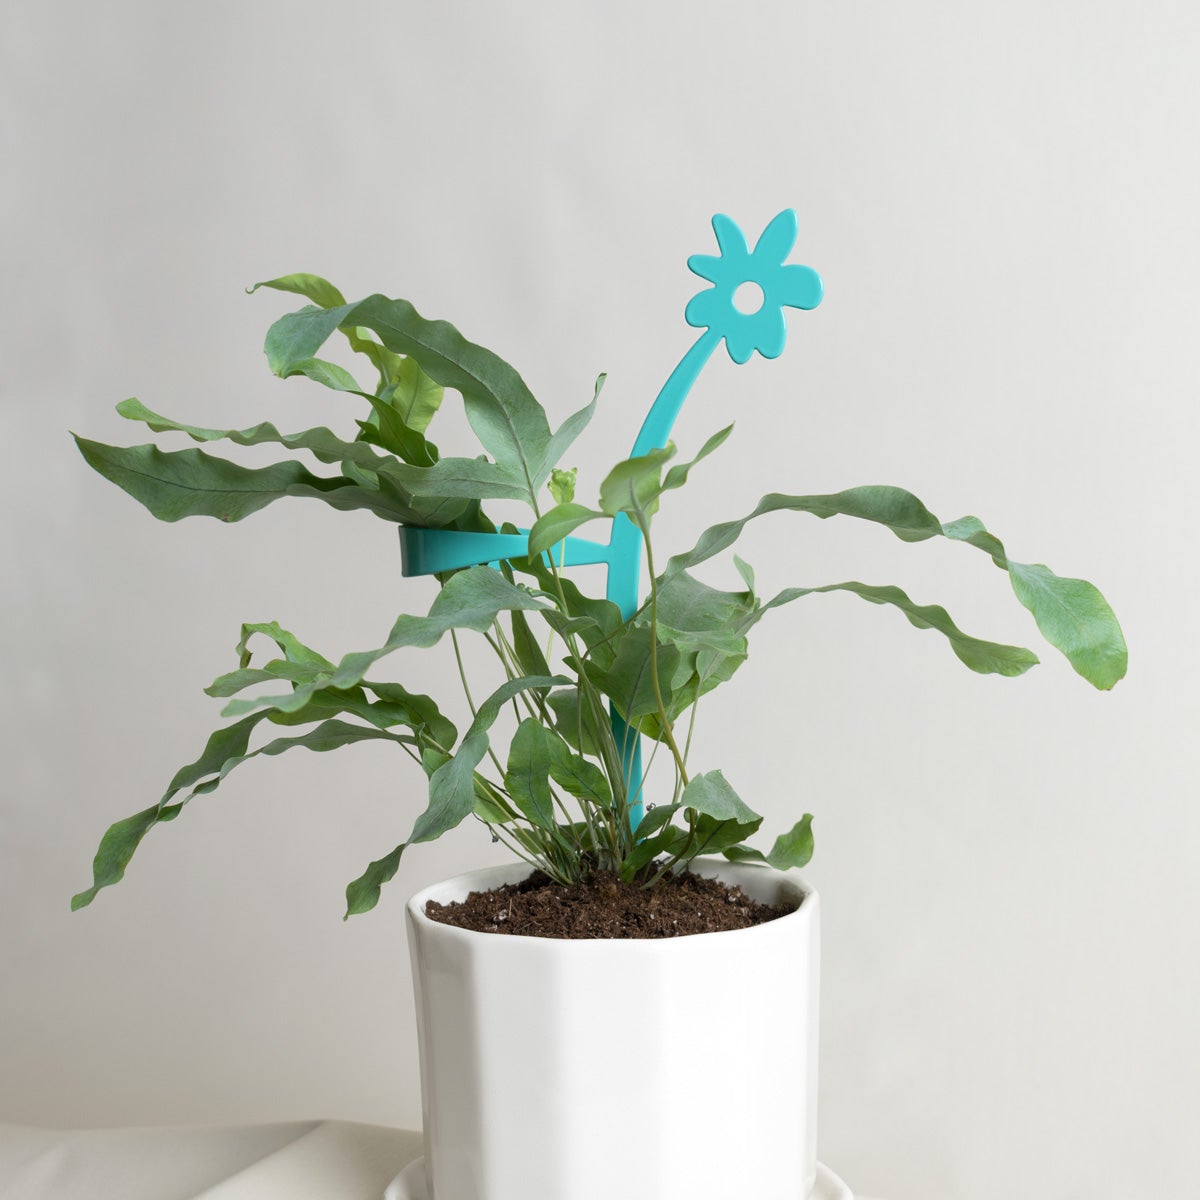 SECONDS SALE! Flowers Plant Support Stake Turquoise Green